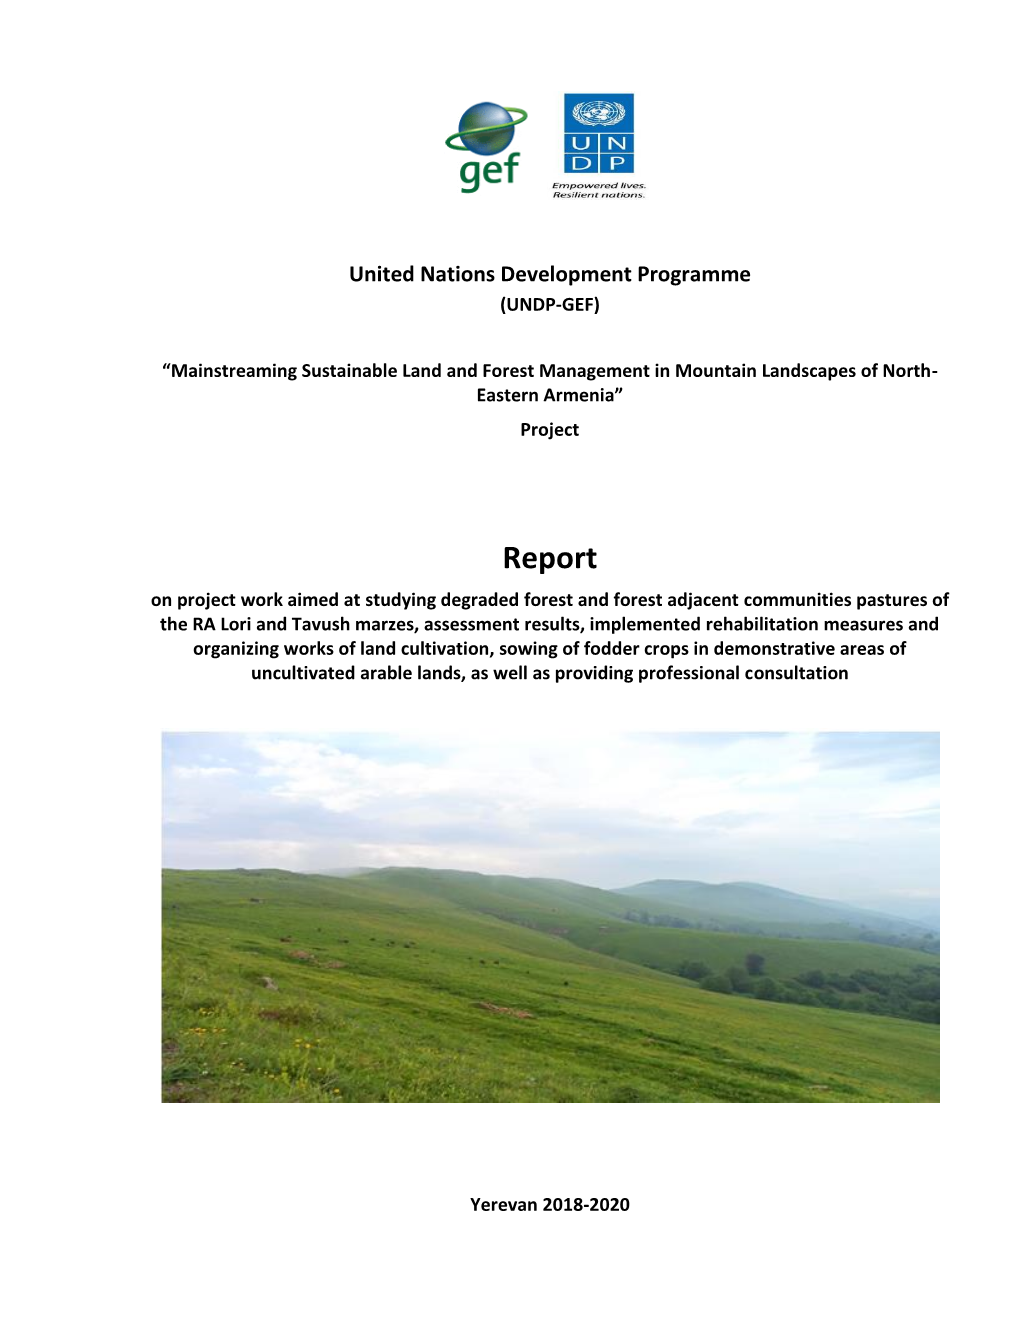 Report on Project Work Aimed at Studying Degraded Forest and Forest Adjacent Communities' Pastures of RA